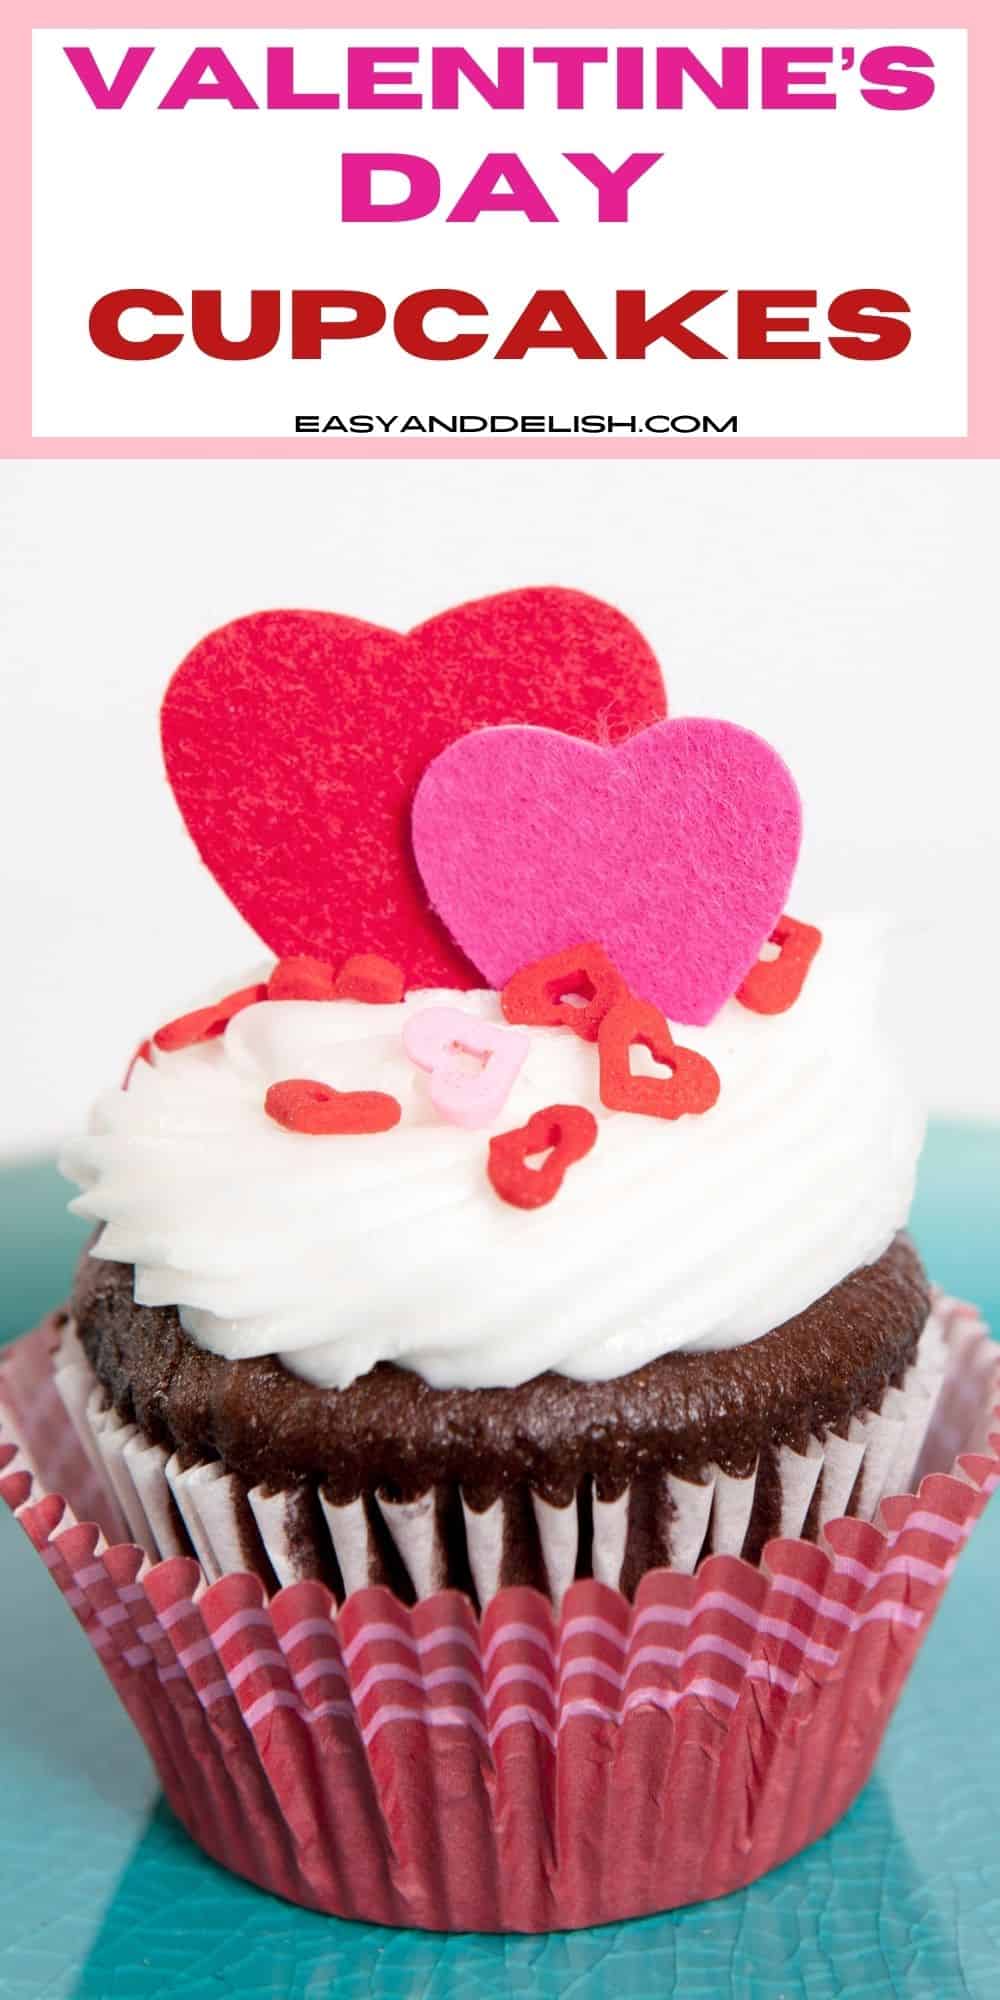 Valentine's day chocolate cupcakes filled with guava paste and topped with cream cheese frosting and sprinkles served on a plate.